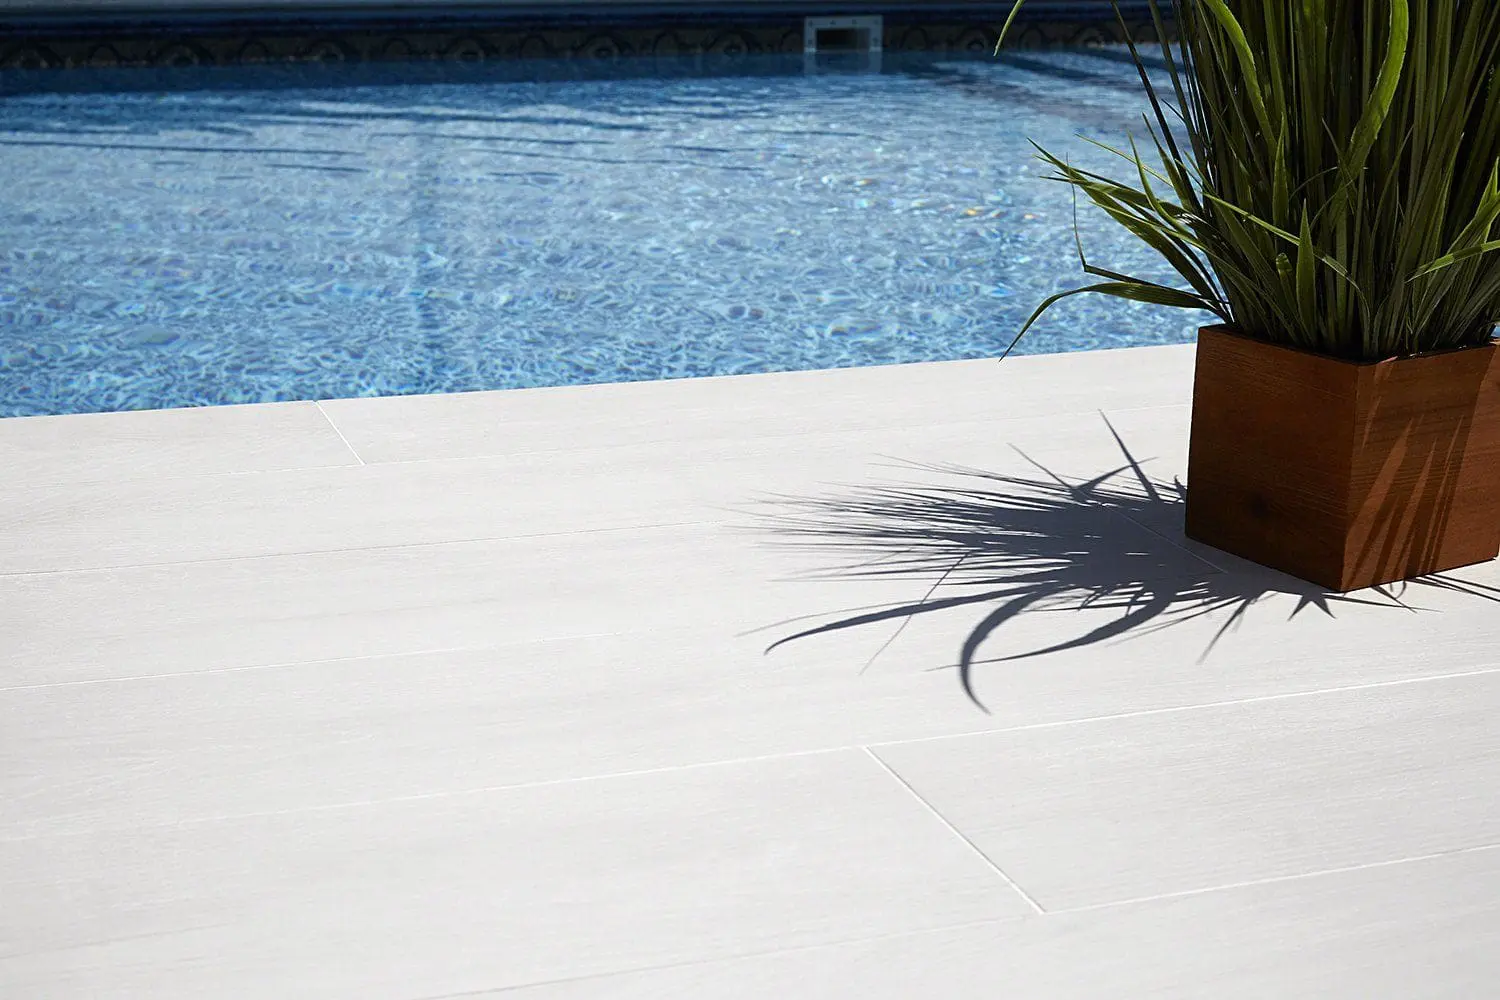 A serene poolside scene with blue water rippling under sunlight. A wooden planter box near the edge of the pool houses a tall green plant, casting a distinct shadow on the decorative concrete ground laid by skilled concrete contractors in Hialeah, FL.